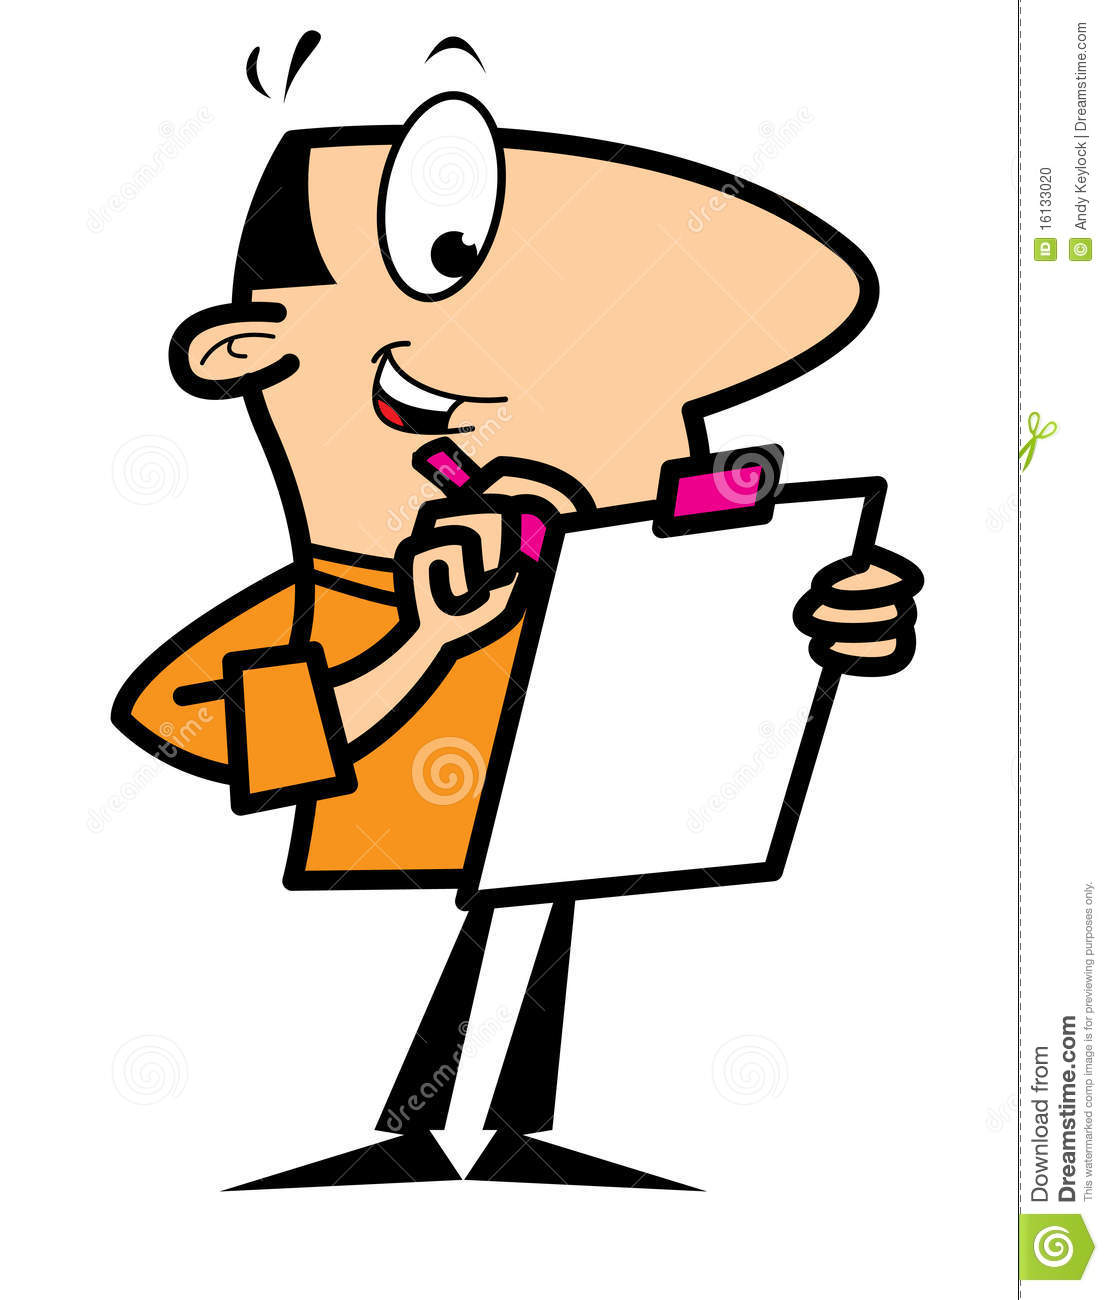 Cartoon Illustration Of A Man Smiling Holding A Clipboard And Pen